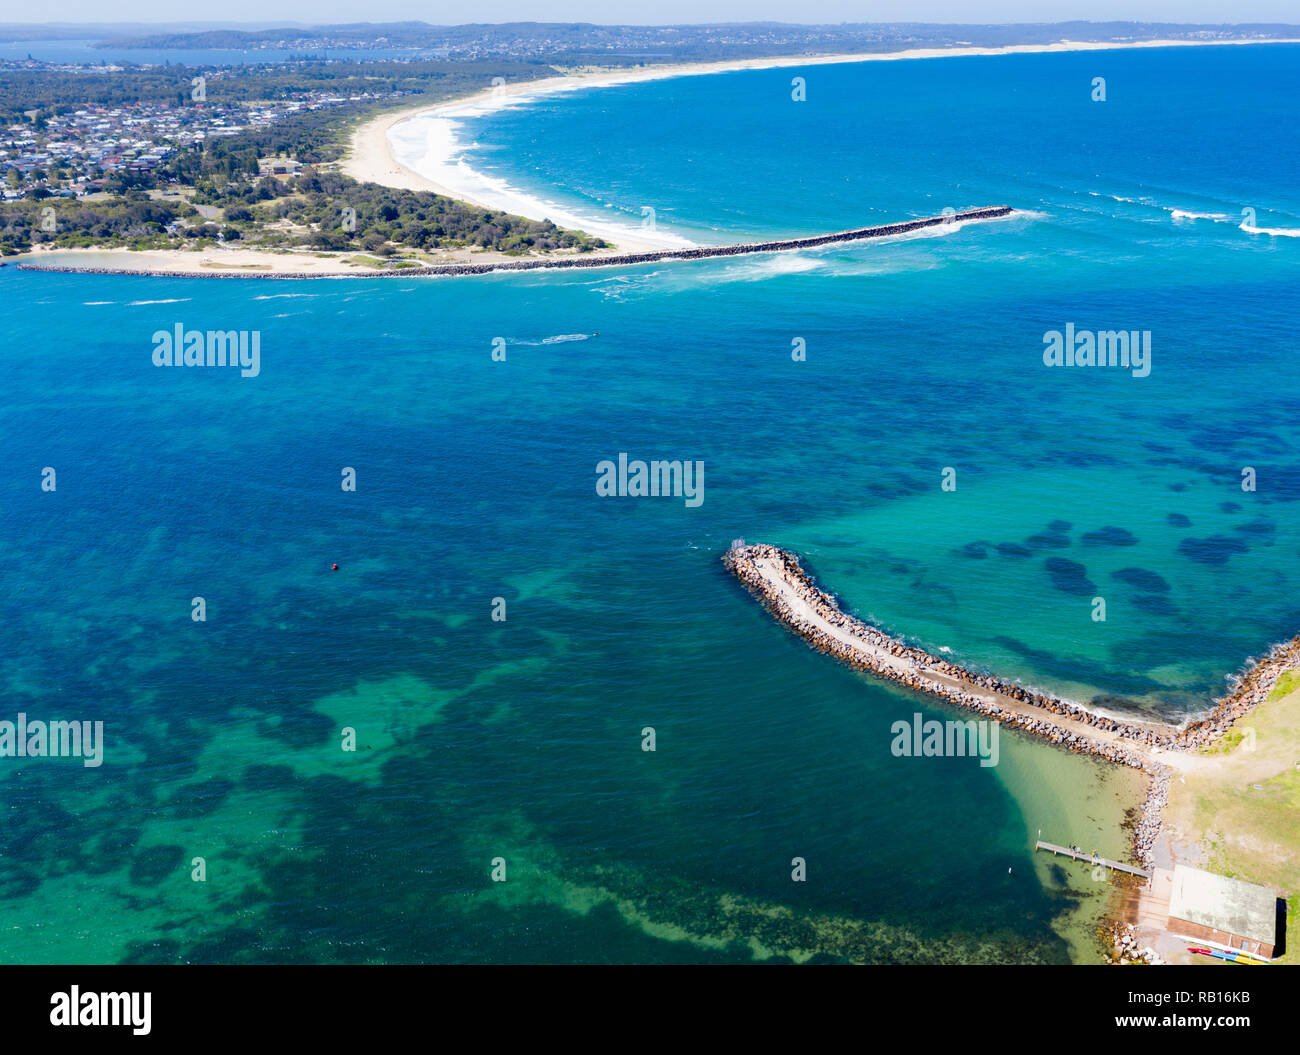 Aerial view of Swansea channel at the mouth of Lake Macquarie which is Australia's largest salt water lake. Swansea - NSW Australia Stock Photo